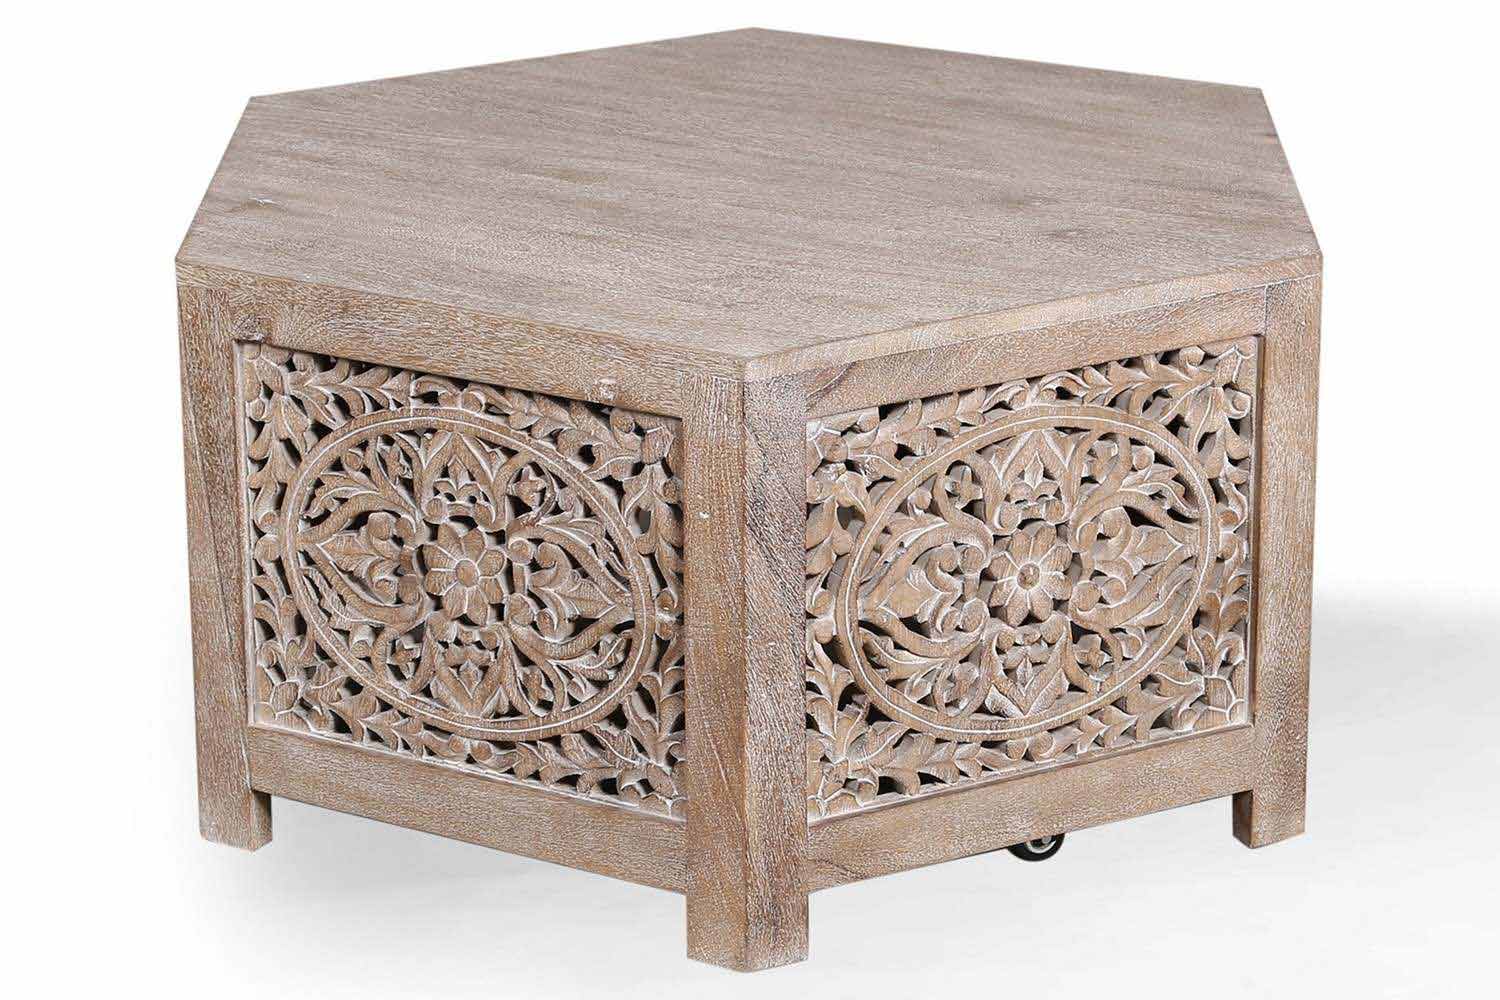 Parker House Crossings Eden Hexagonal Cocktail Table - Toasted Tumbleweed